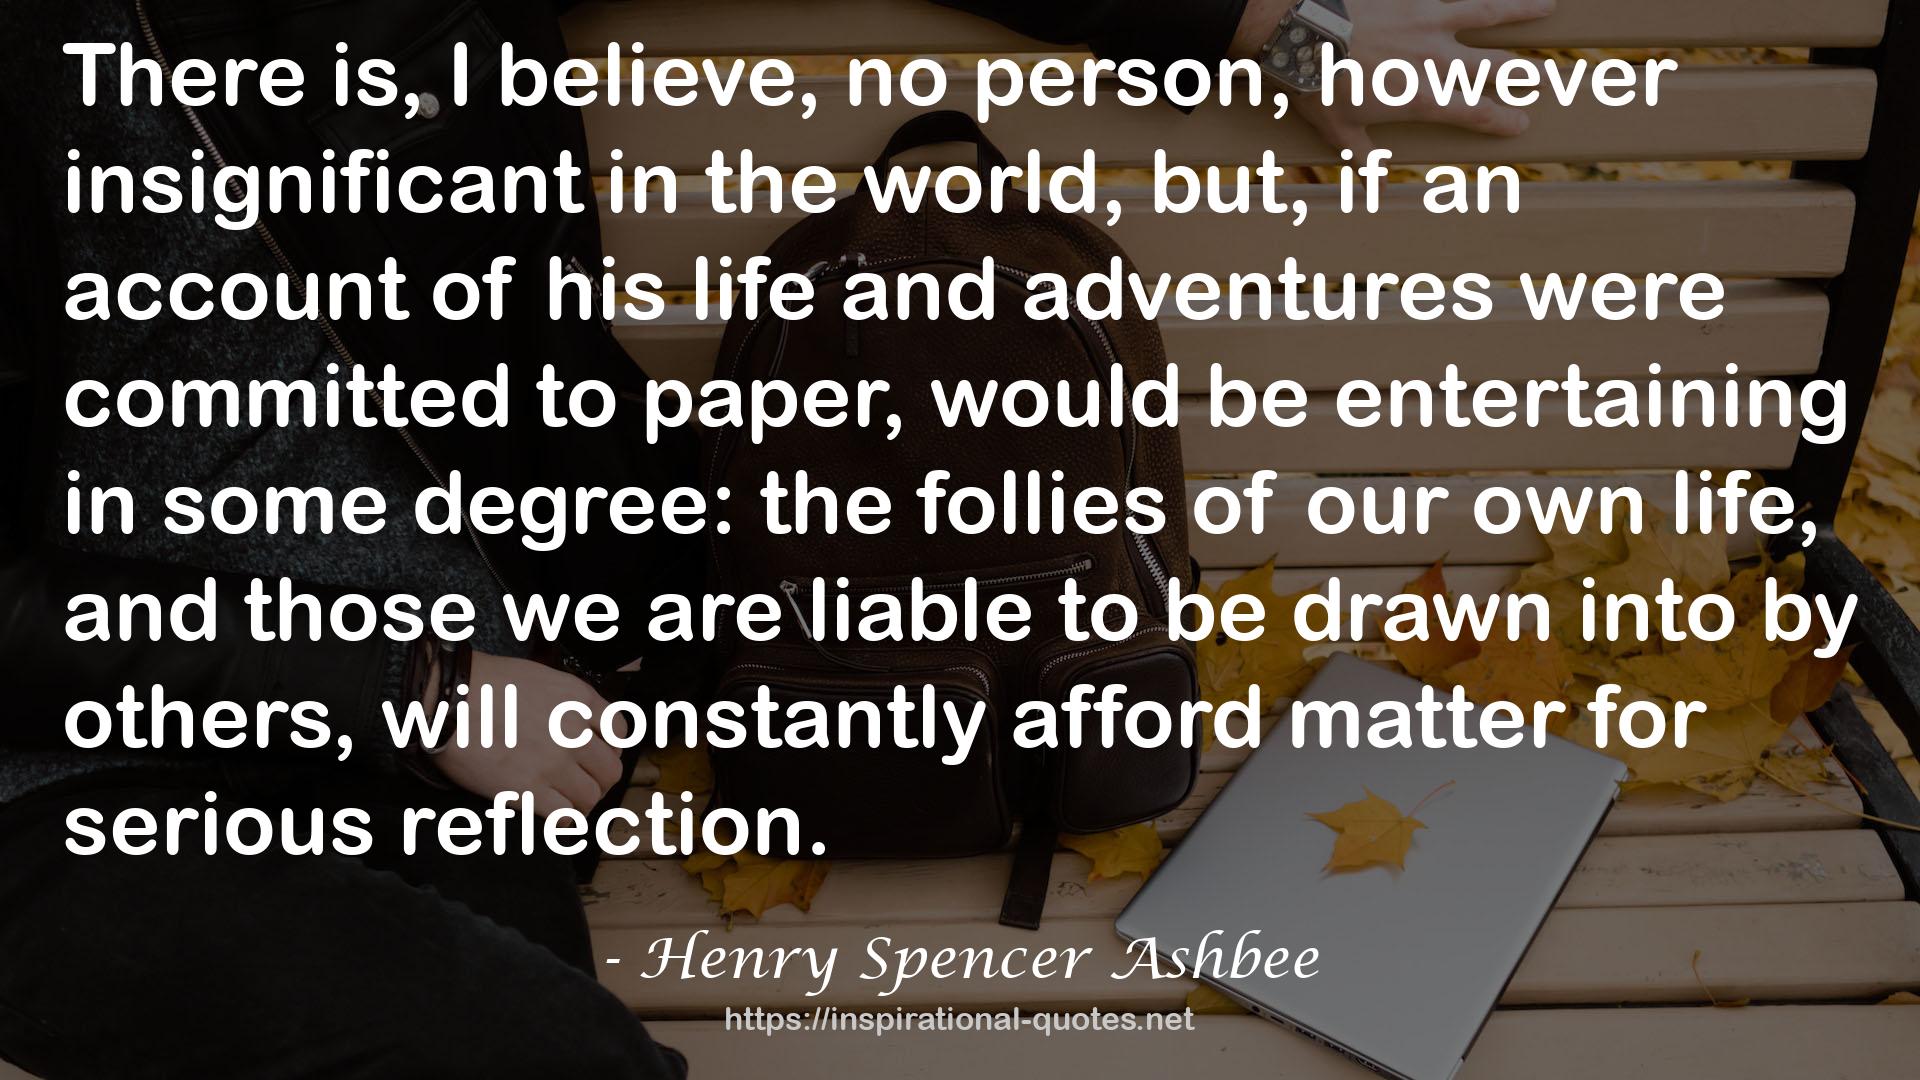 Henry Spencer Ashbee QUOTES